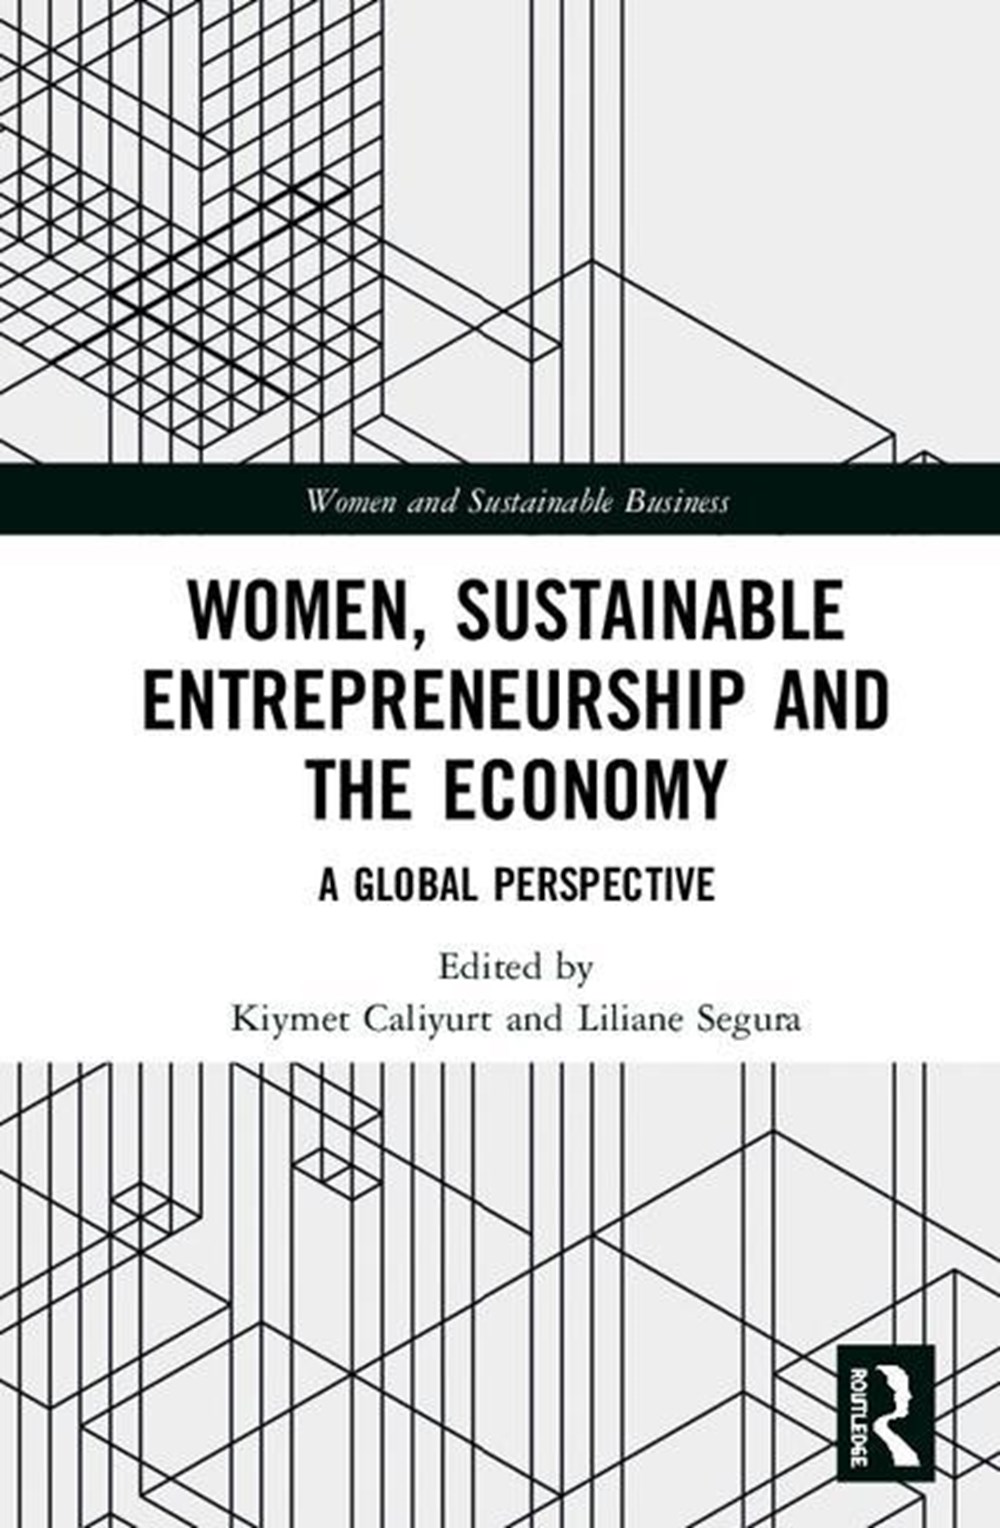 Women, Sustainable Entrepreneurship and the Economy A Global Perspective